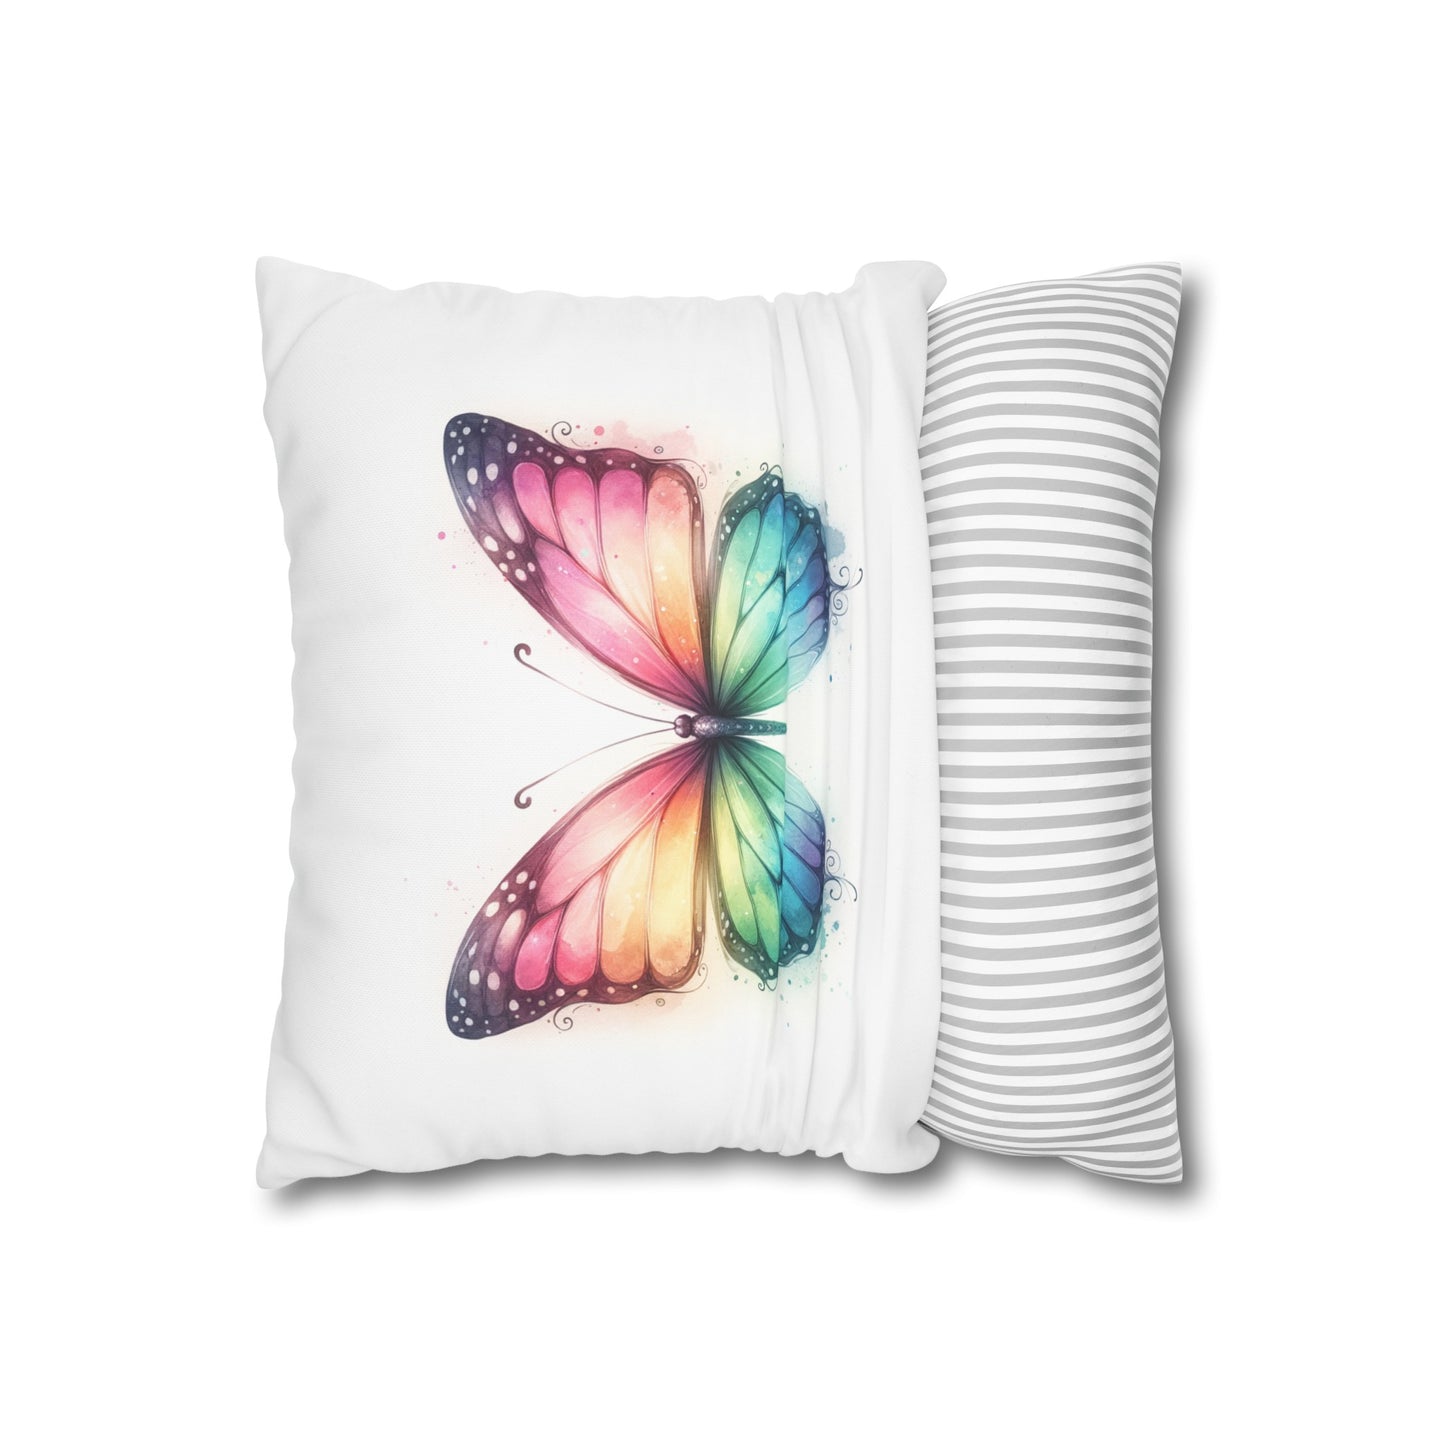 Fly Like A Butterfly #1 Cushion Cover